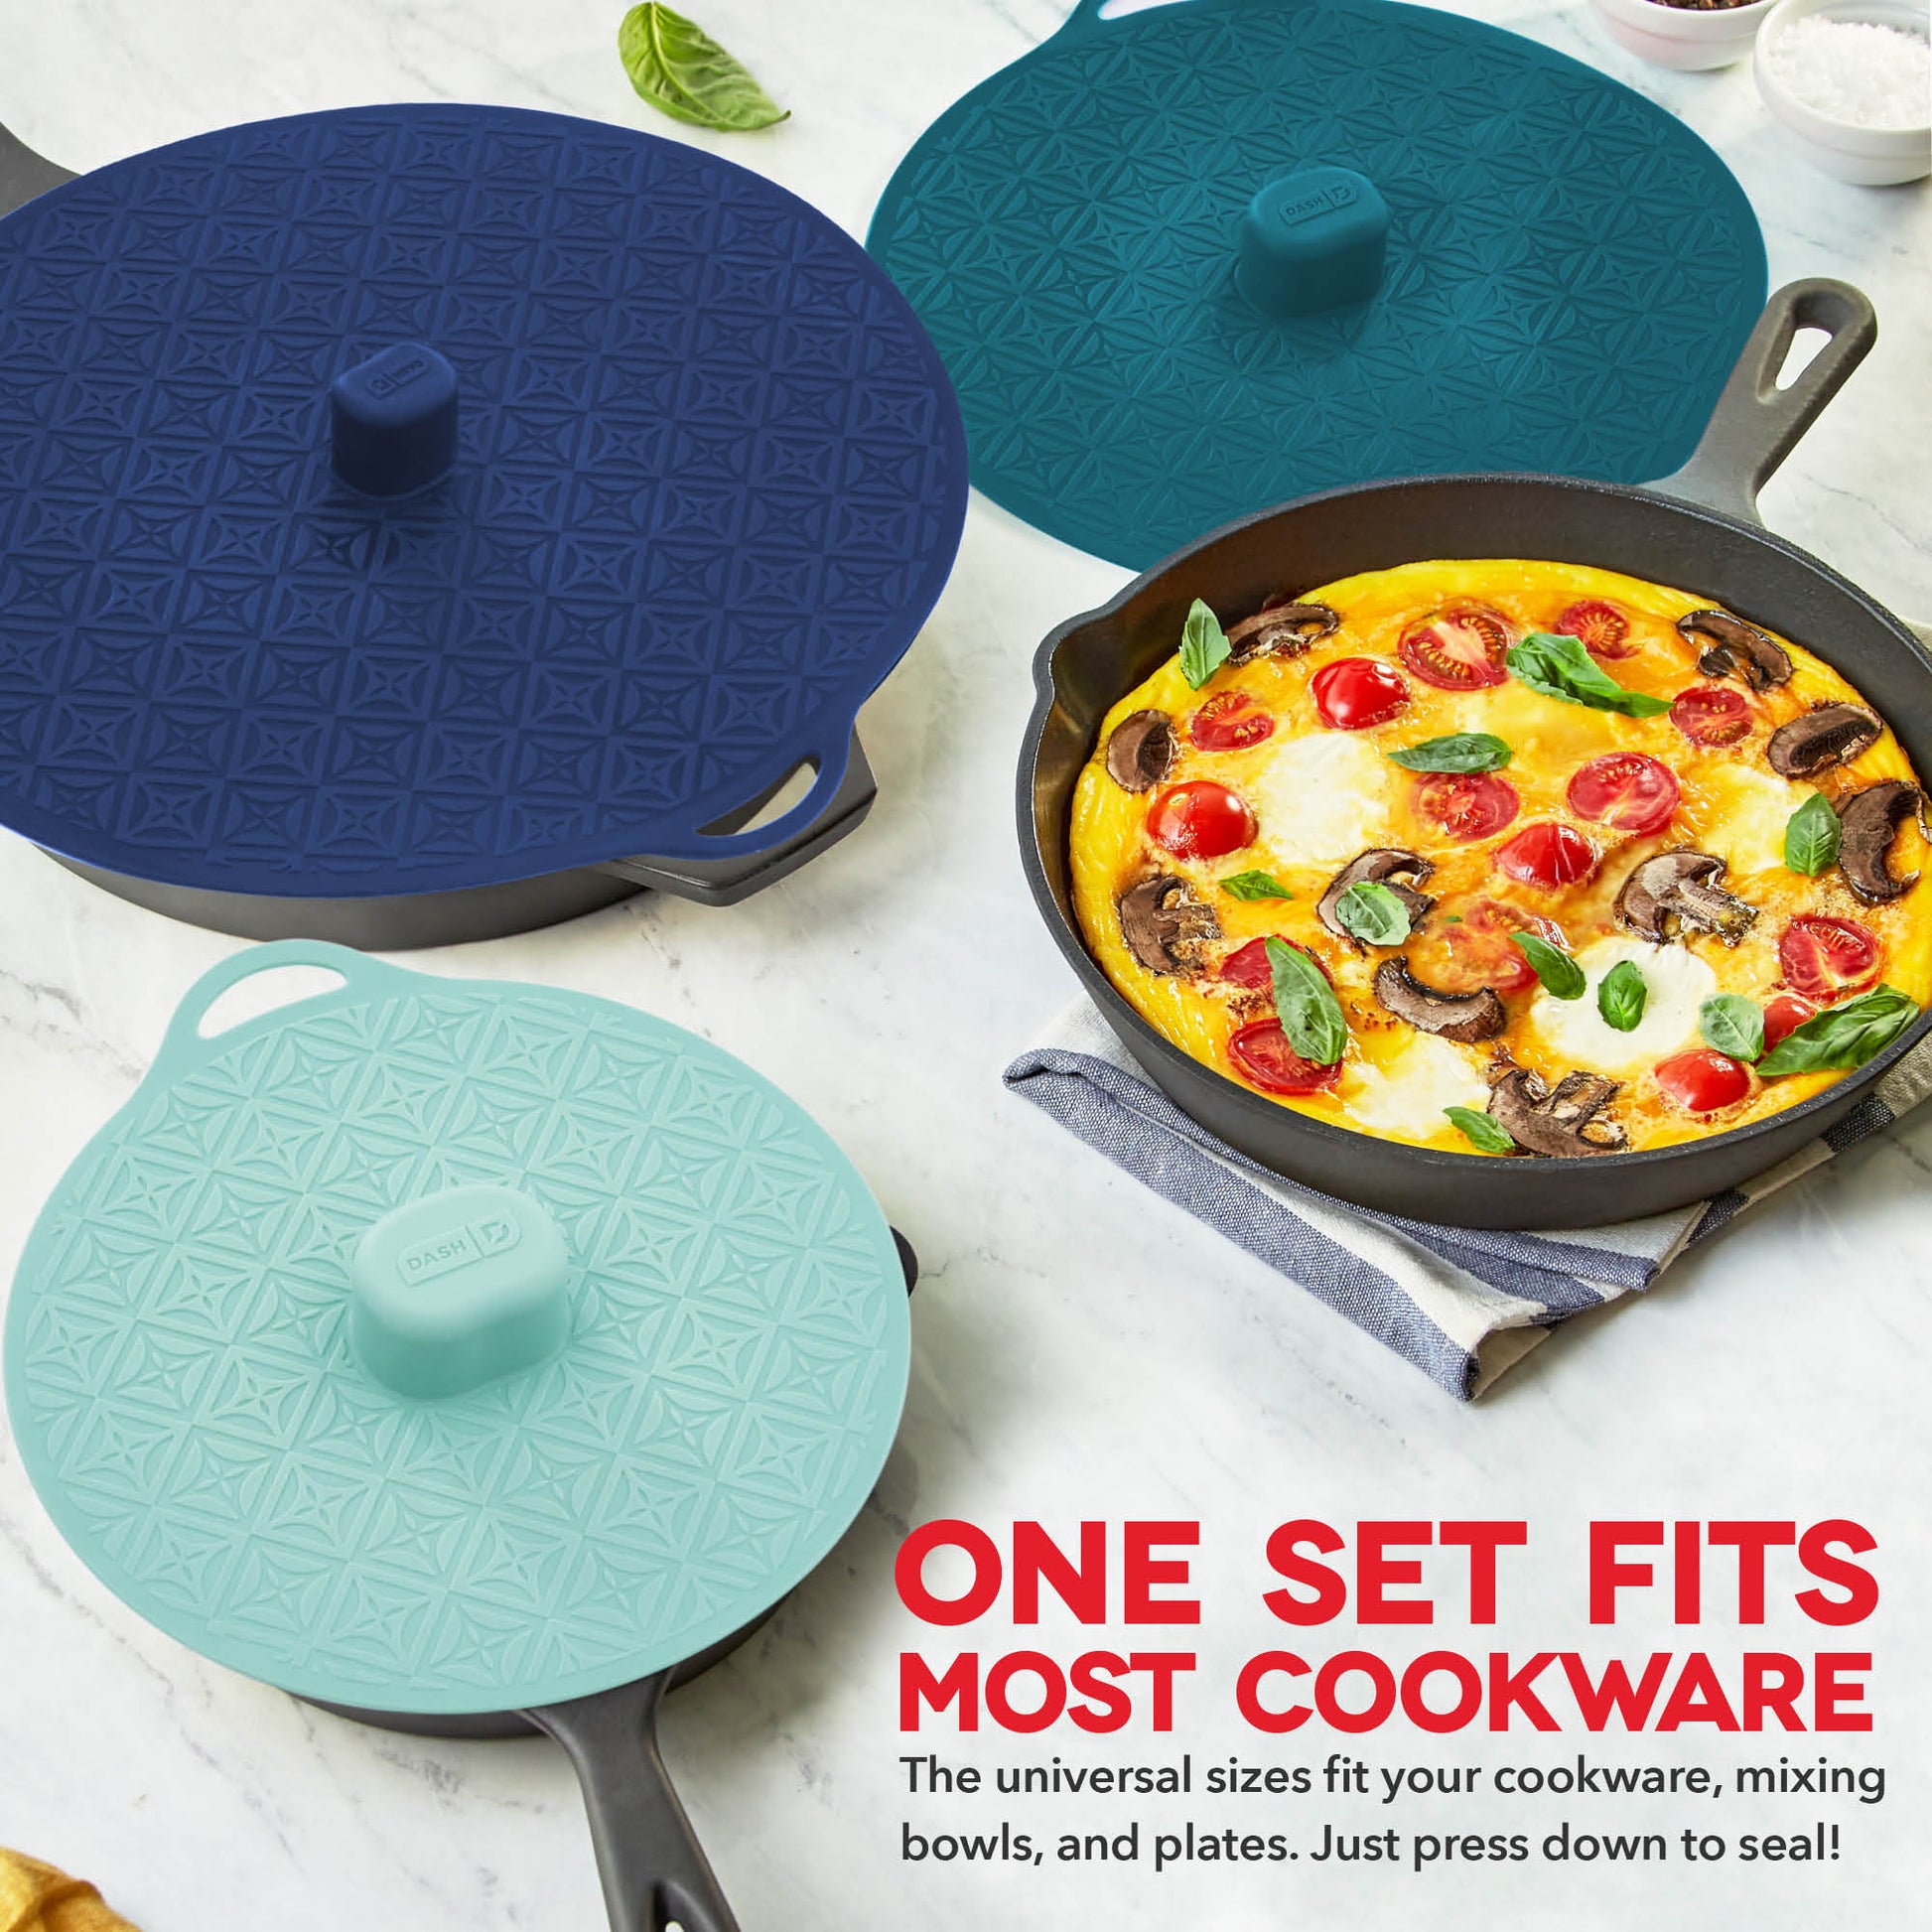 Dash Cookware and Gadgets